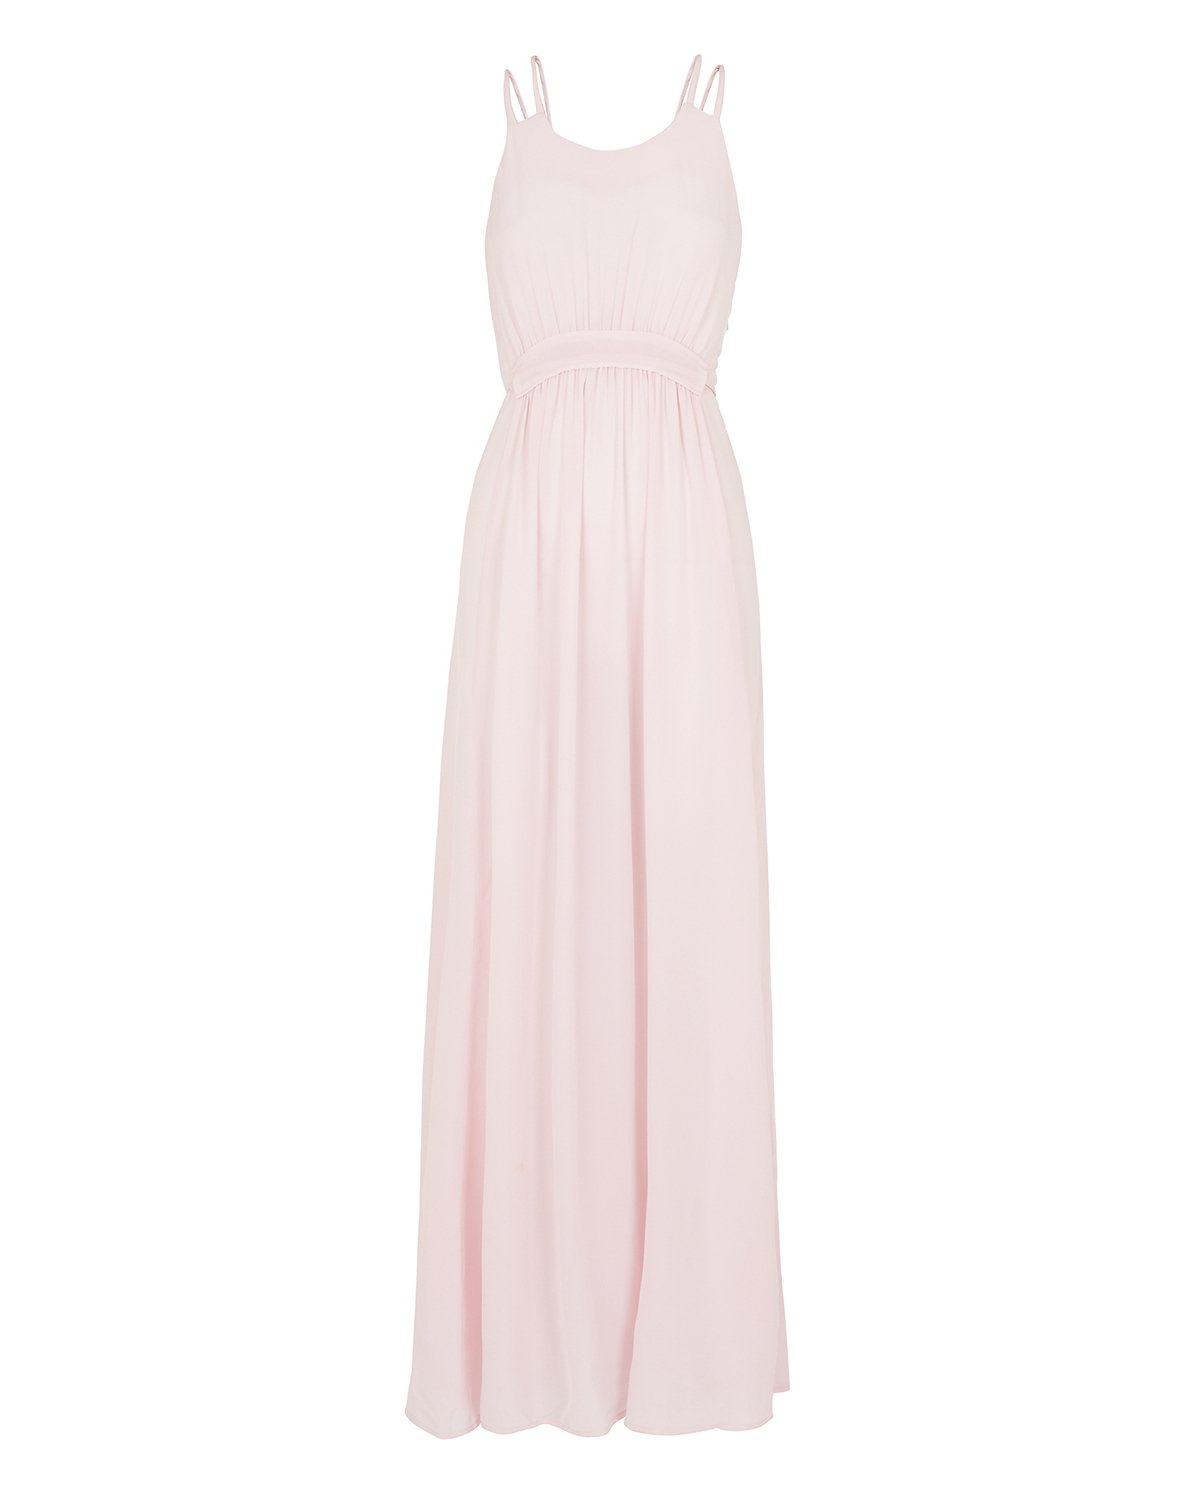 WHISTLES Buena Silk Maxi Dress in Pale Pink | Endource